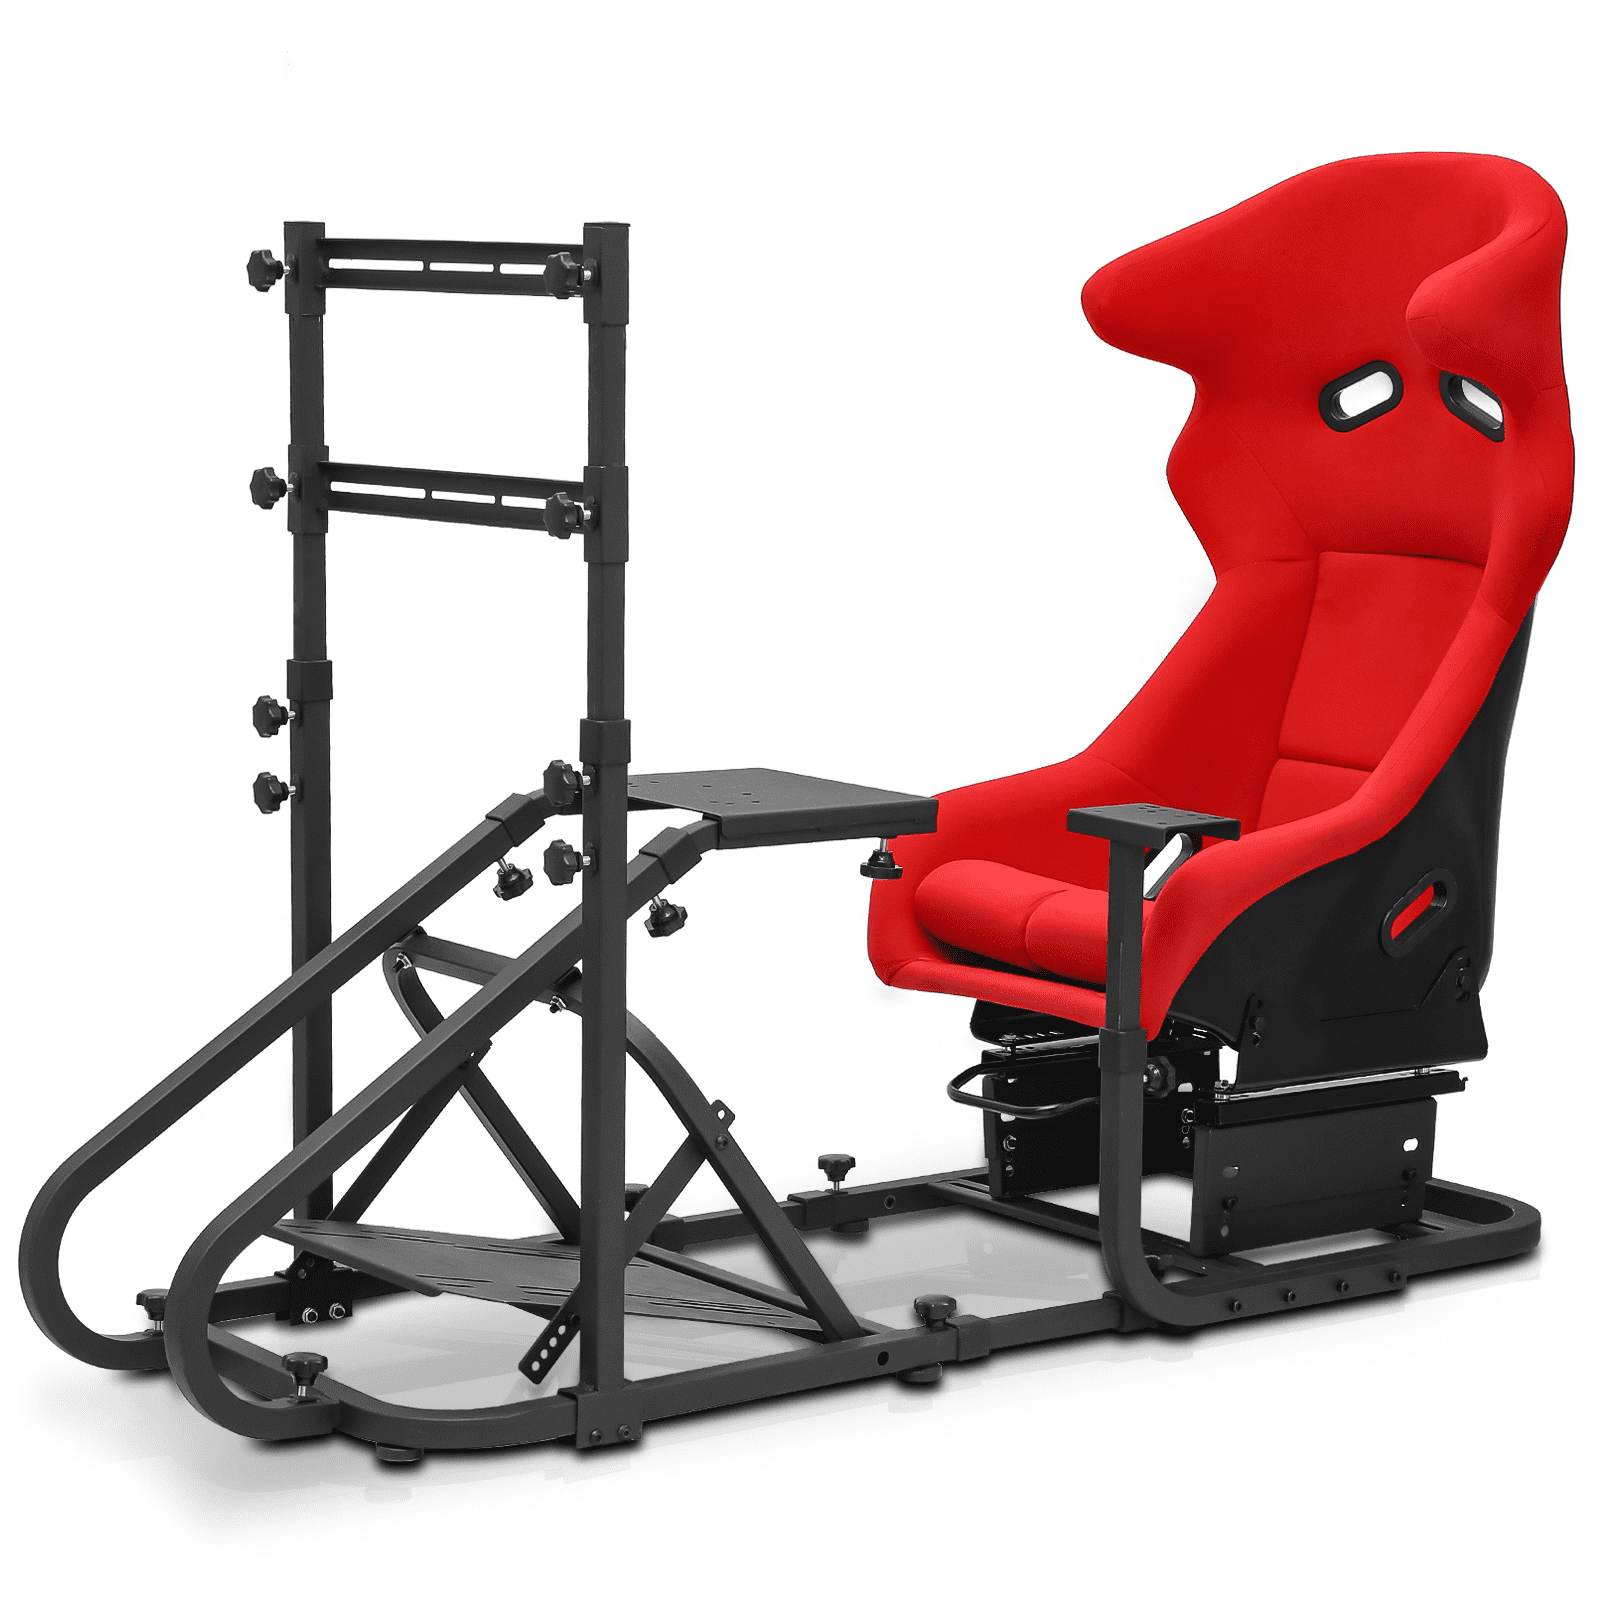 MoNiBloom Racing Simulator Cockpit with Gaming Seat Fit for